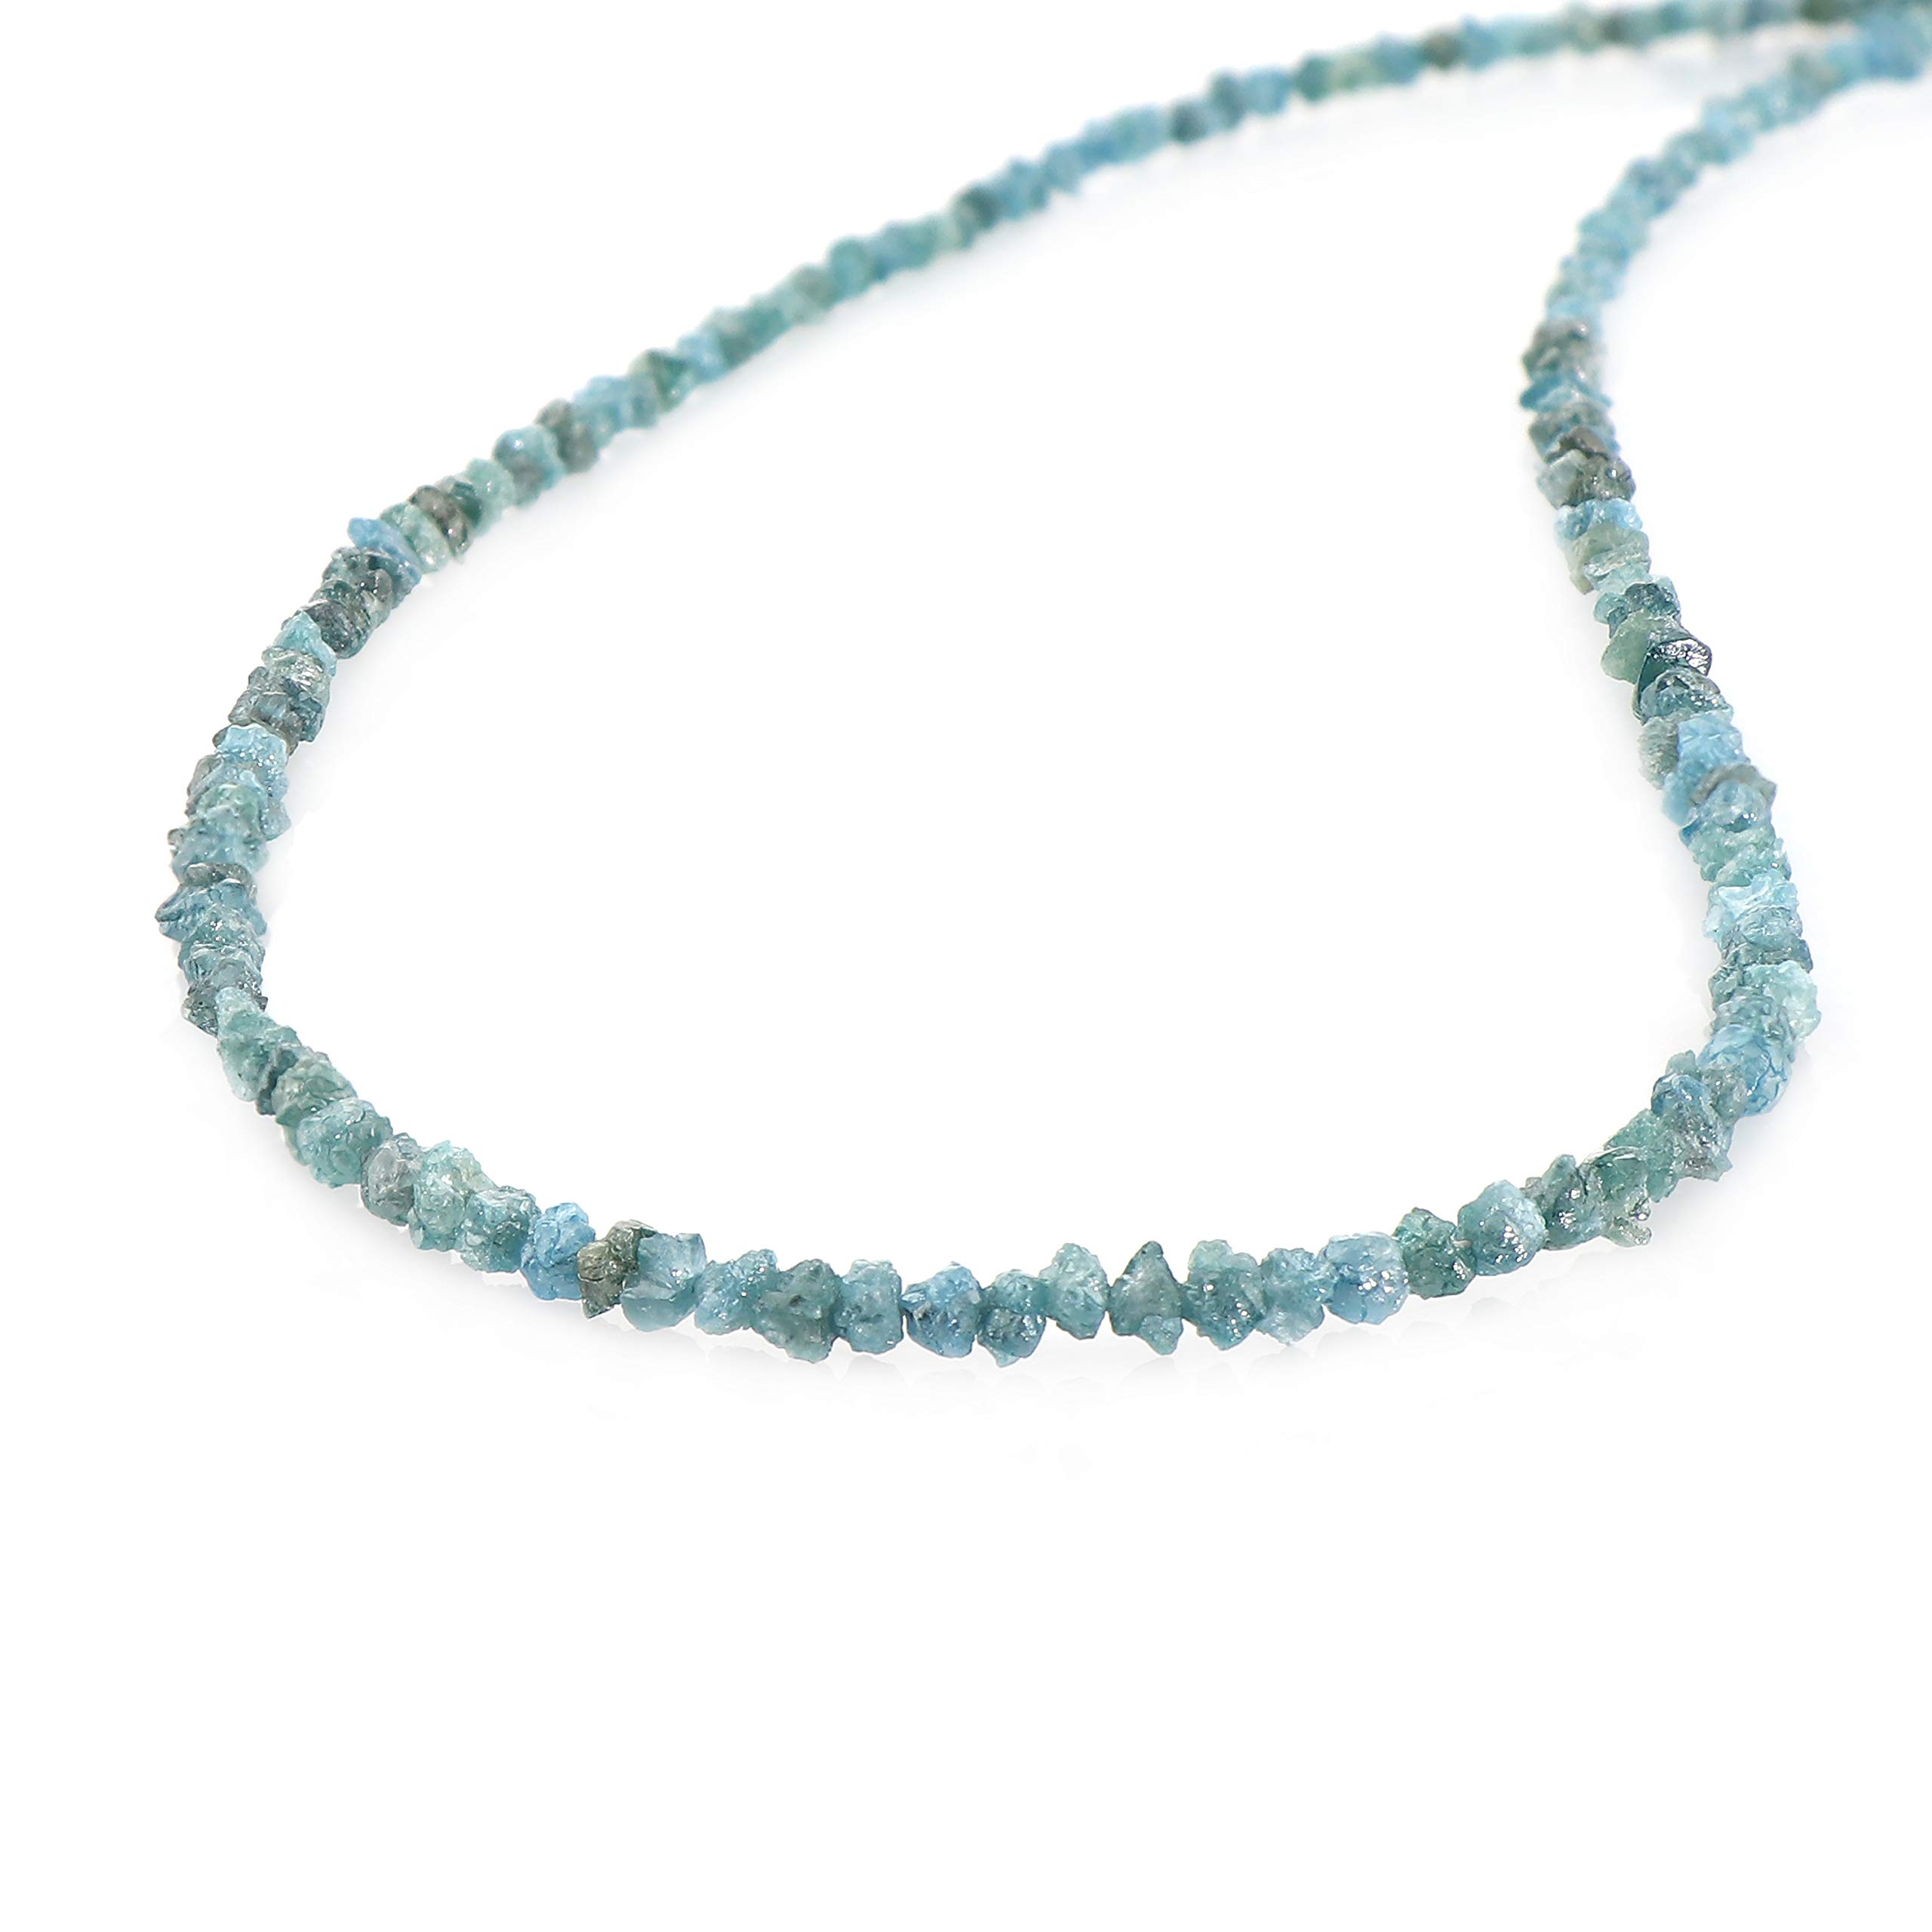 Natural Blue Diamond 1.5- 2.5MM Rough Gemstone Beads 20 Inches Beaded Necklace with Additional 2.5 inch Extension lobster lock 925 Silver